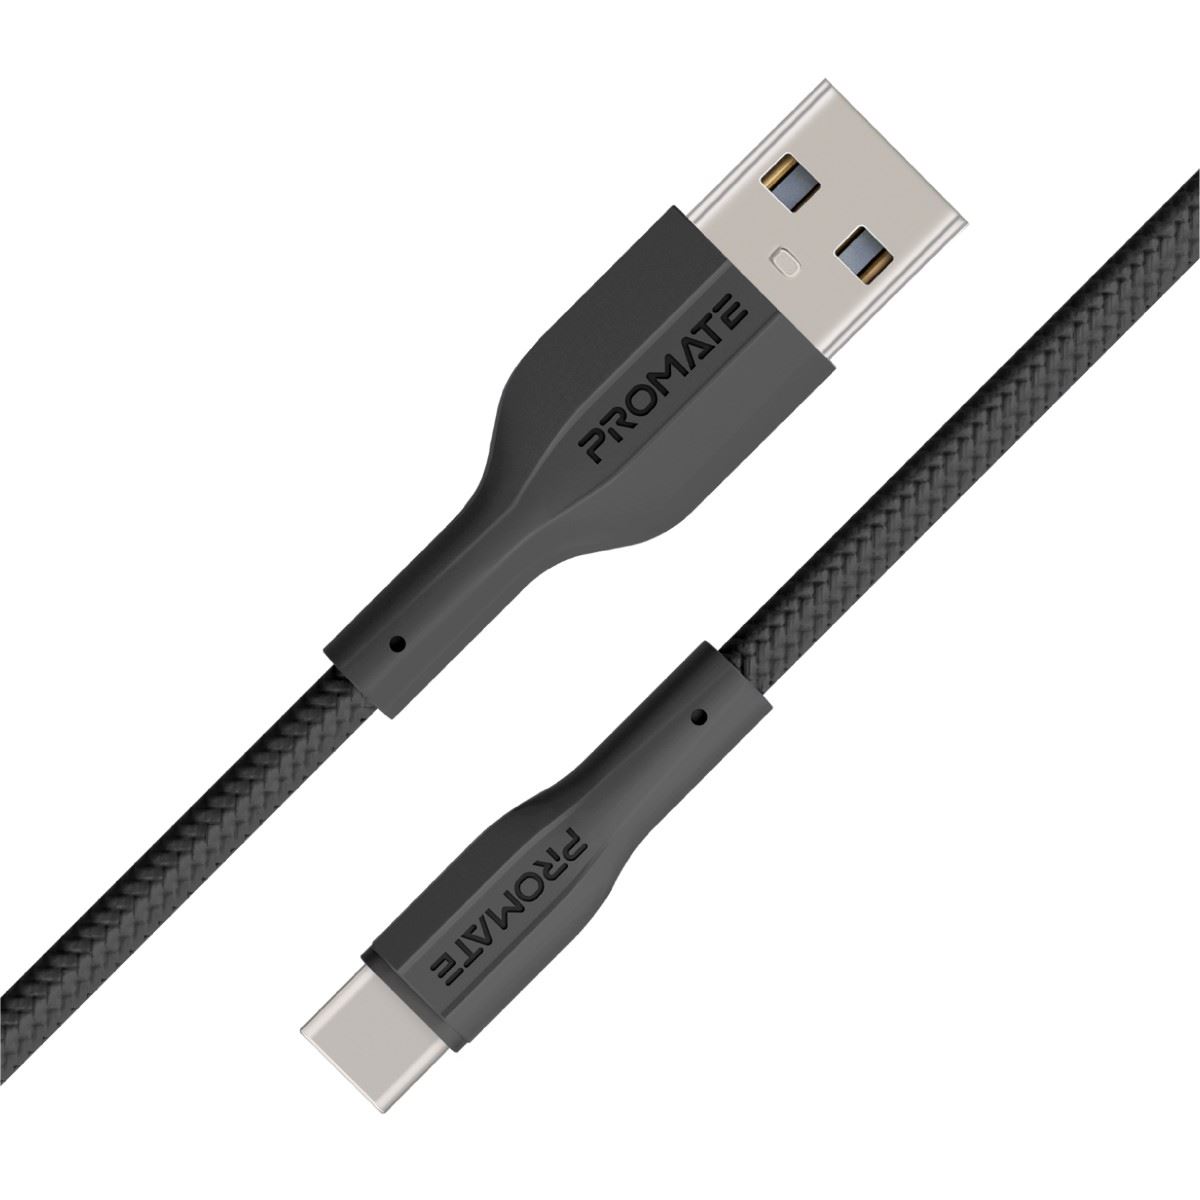 PROMATE 1M USB-A to USB-C Super Flexible Cable. Supports 2A Charging & 480Mbps Data Transfer. Black Colour.